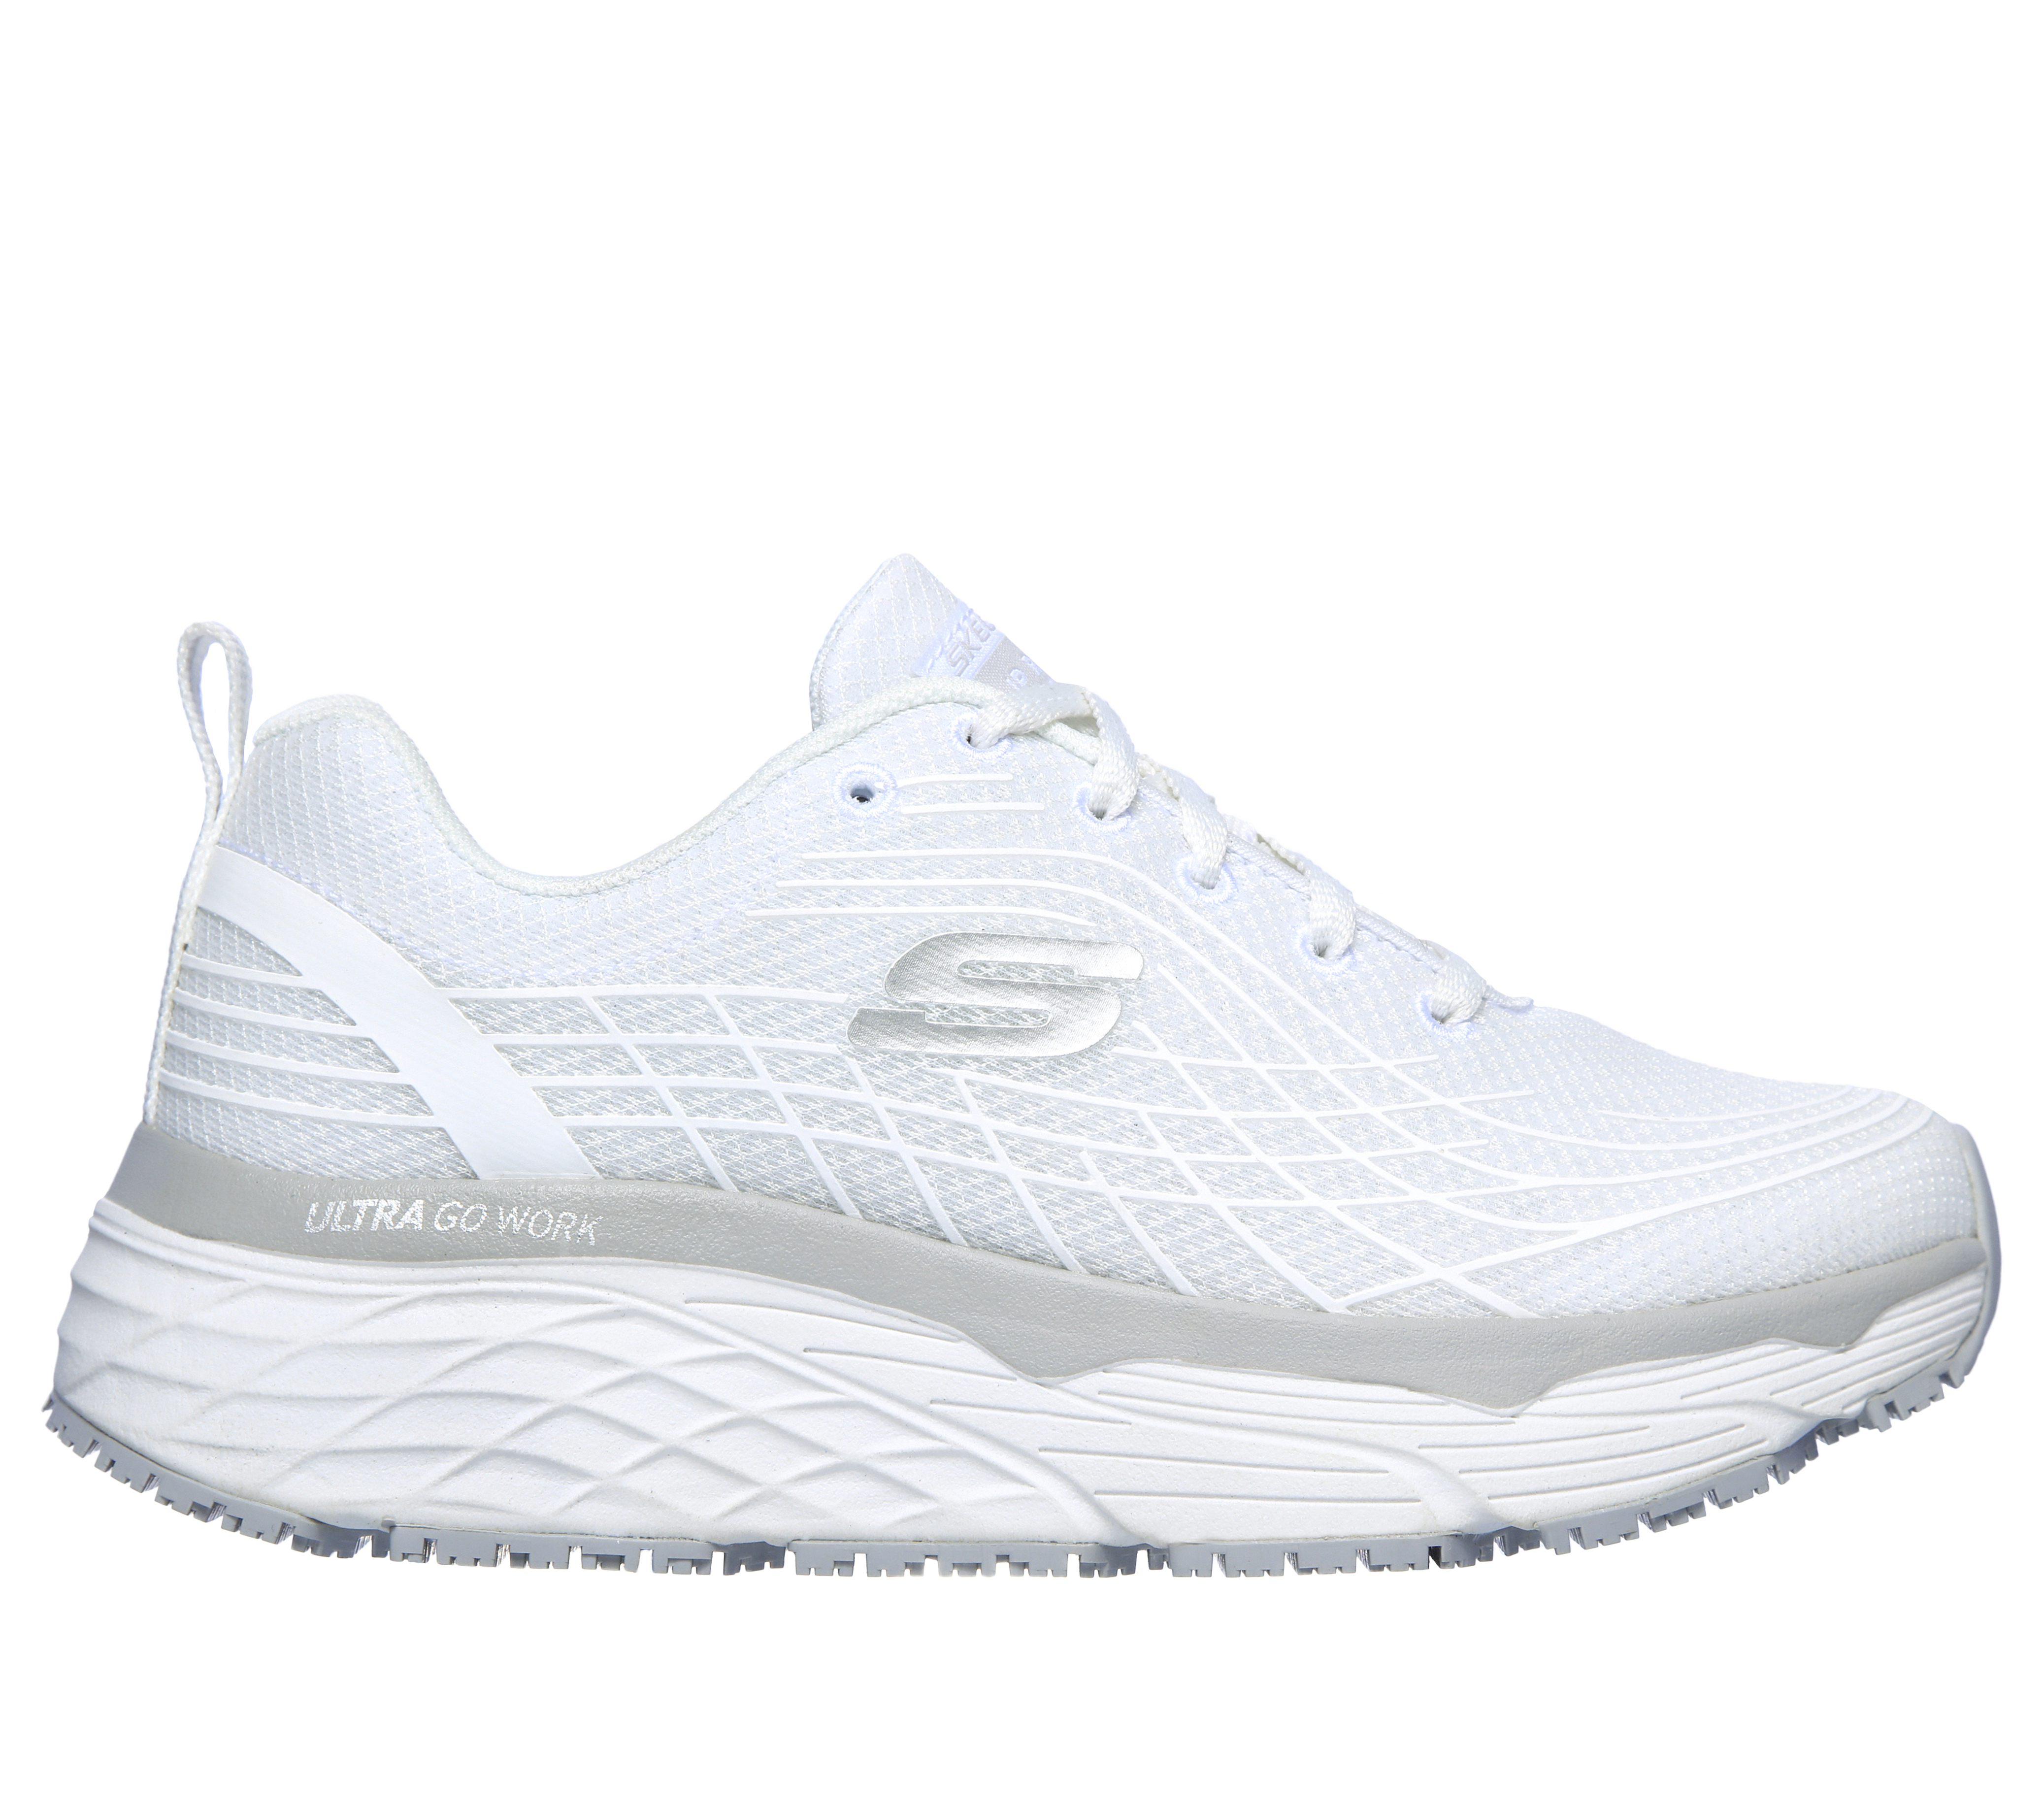 SR | Cushioning Relaxed Fit: Work Elite Max SKECHERS